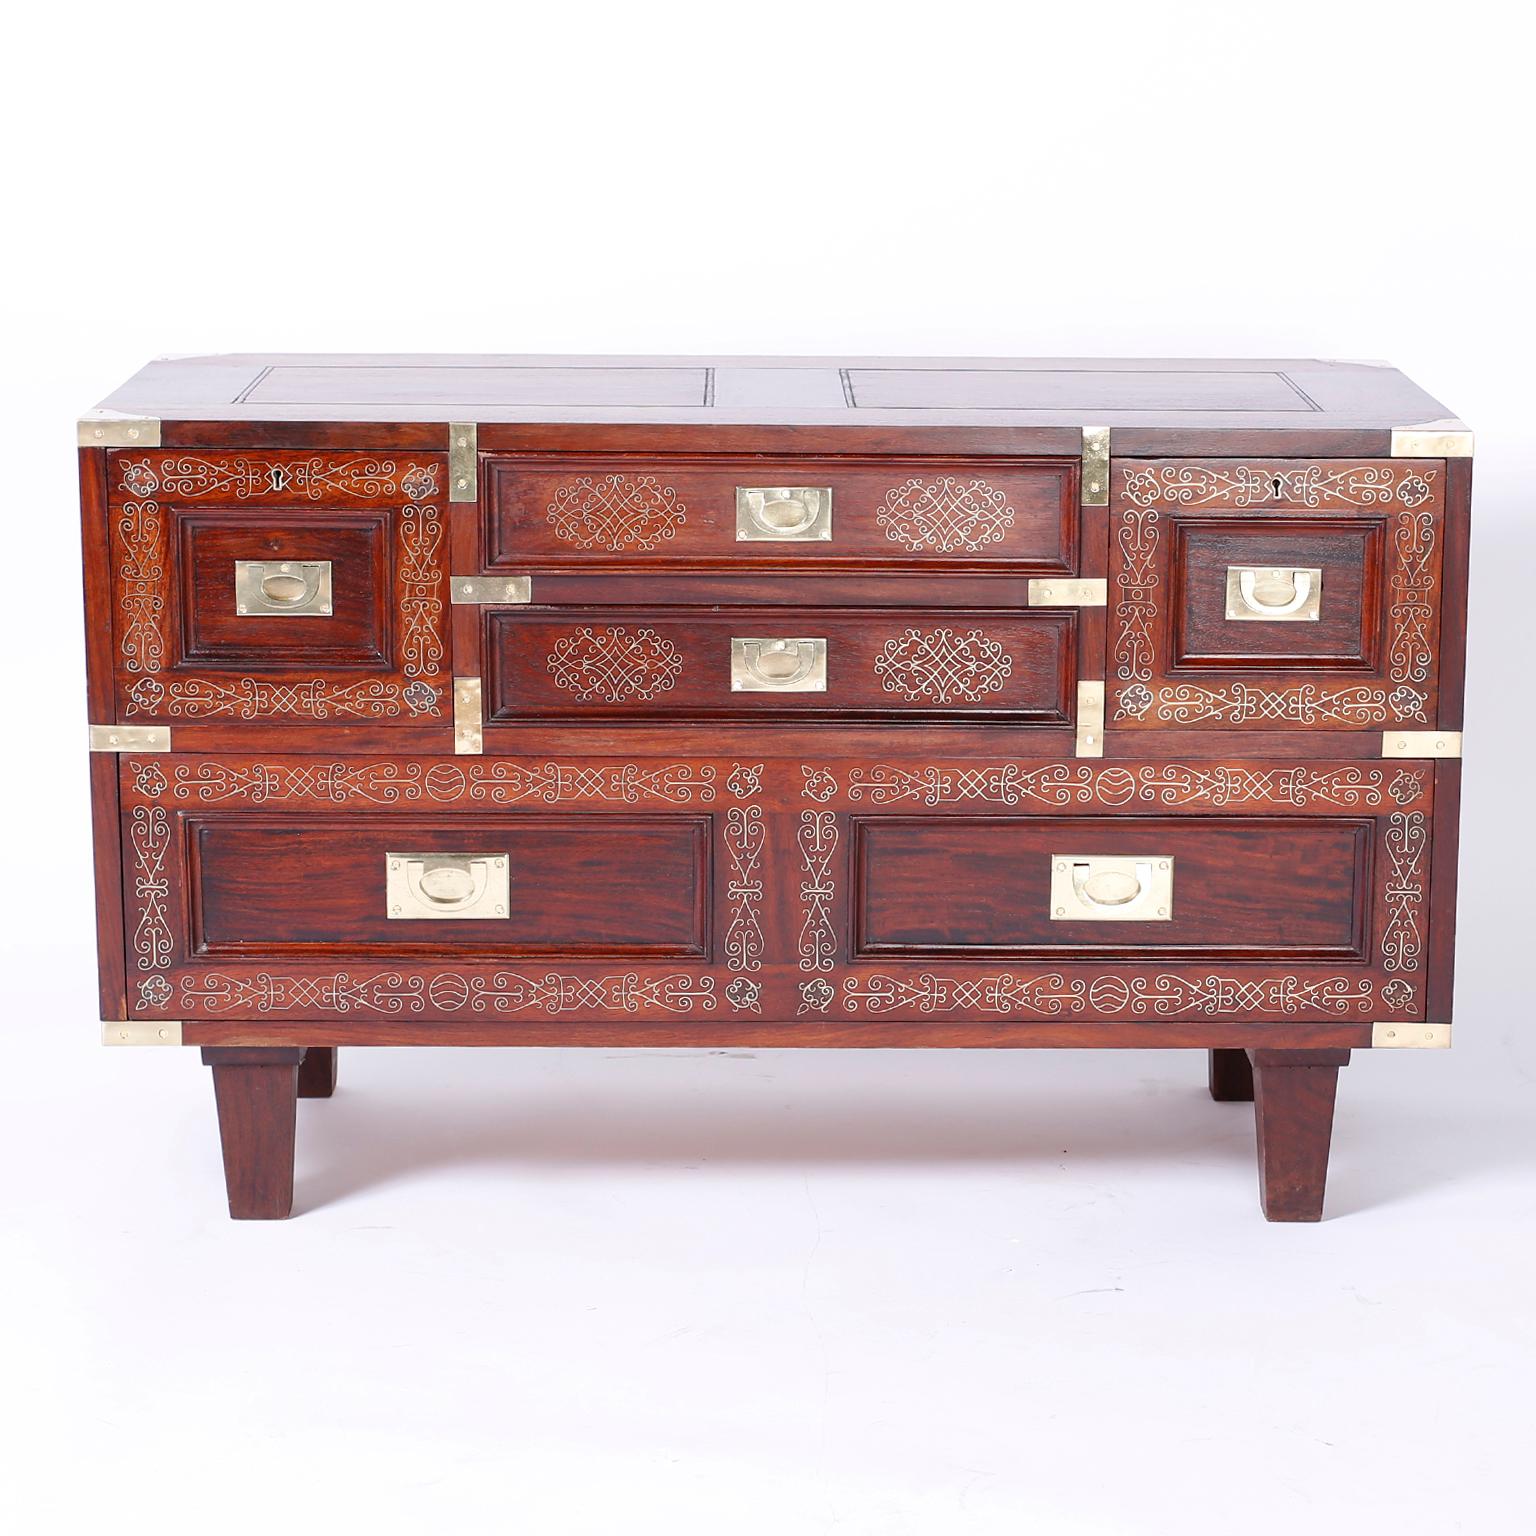 Anglo Indian chest expertly crafted in rosewood featuring floral brass string inlays on the top, draw fronts, and sides, campaign hardware and tapered legs. As seen in the last photo of the listing, a similar chest is available, making a near pair.